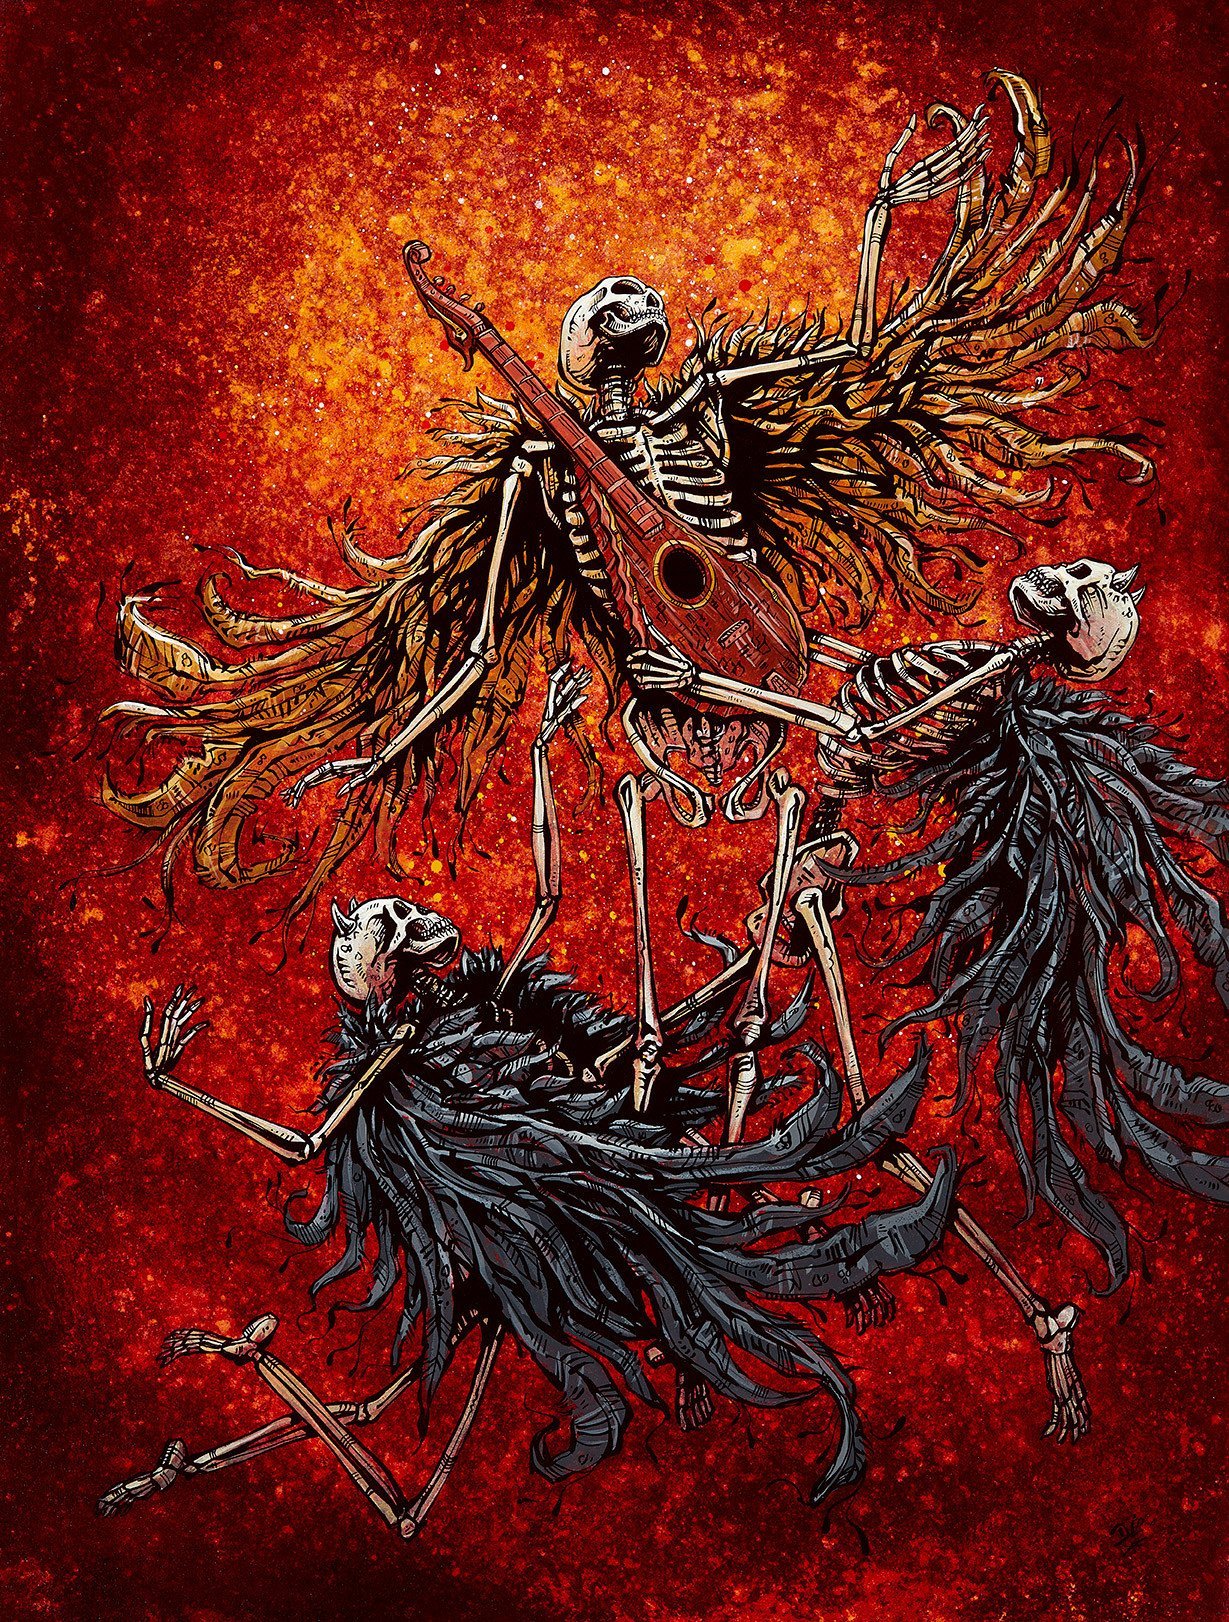 Ascension by Day of the Dead Artist David Lozeau, Day of the Dead Art, Dia de los Muertos Art, Dia de los Muertos Artist